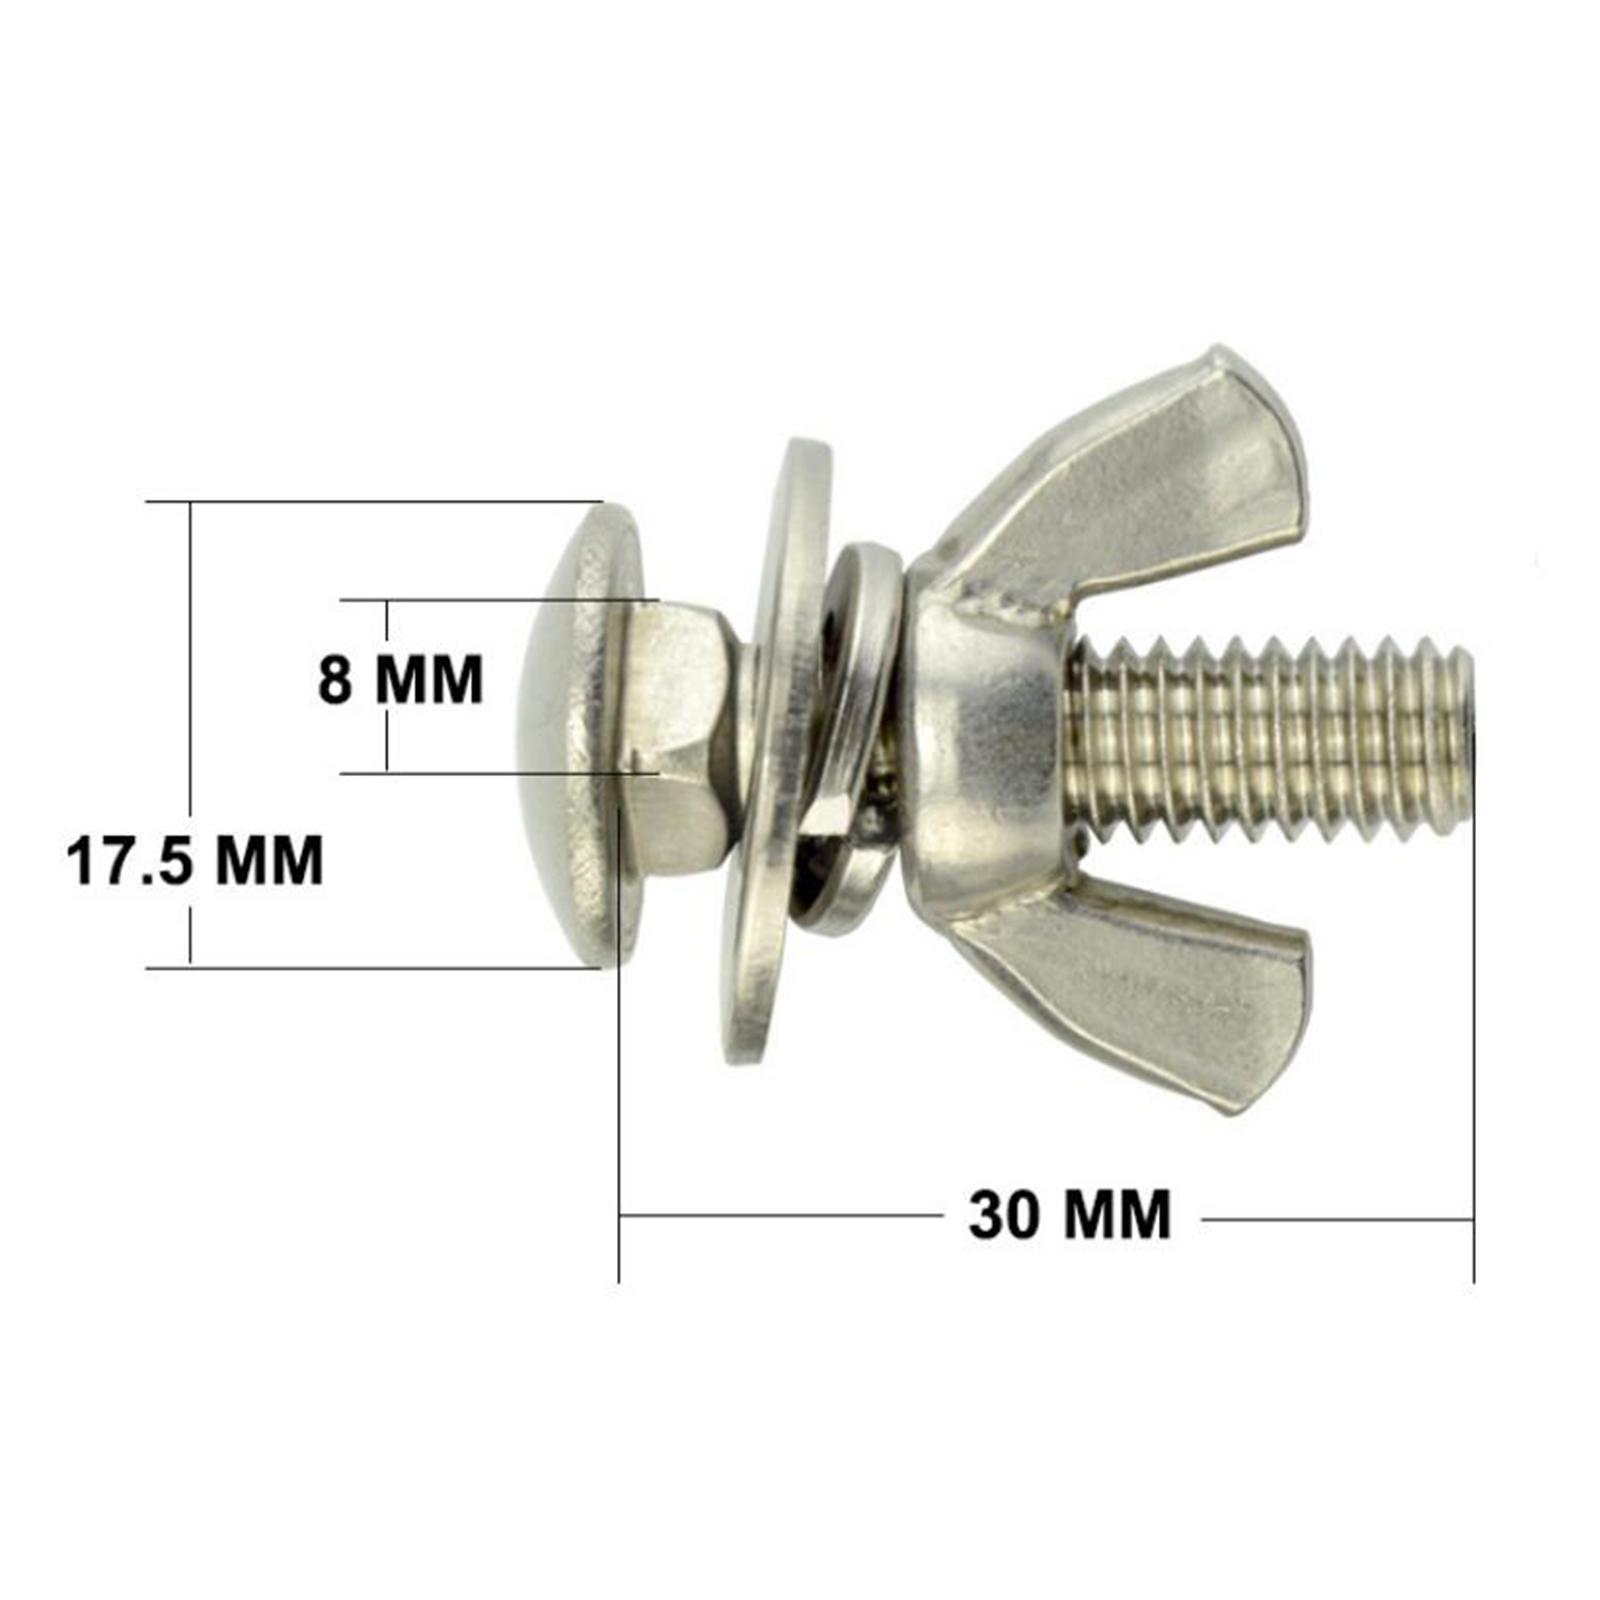 2Pcs Tech Diving Butterfly Screw s Wing Nuts Thumb Screws Fastener 316 Stainless for Backplates Accessories, Rust Resistance - image 4 of 5